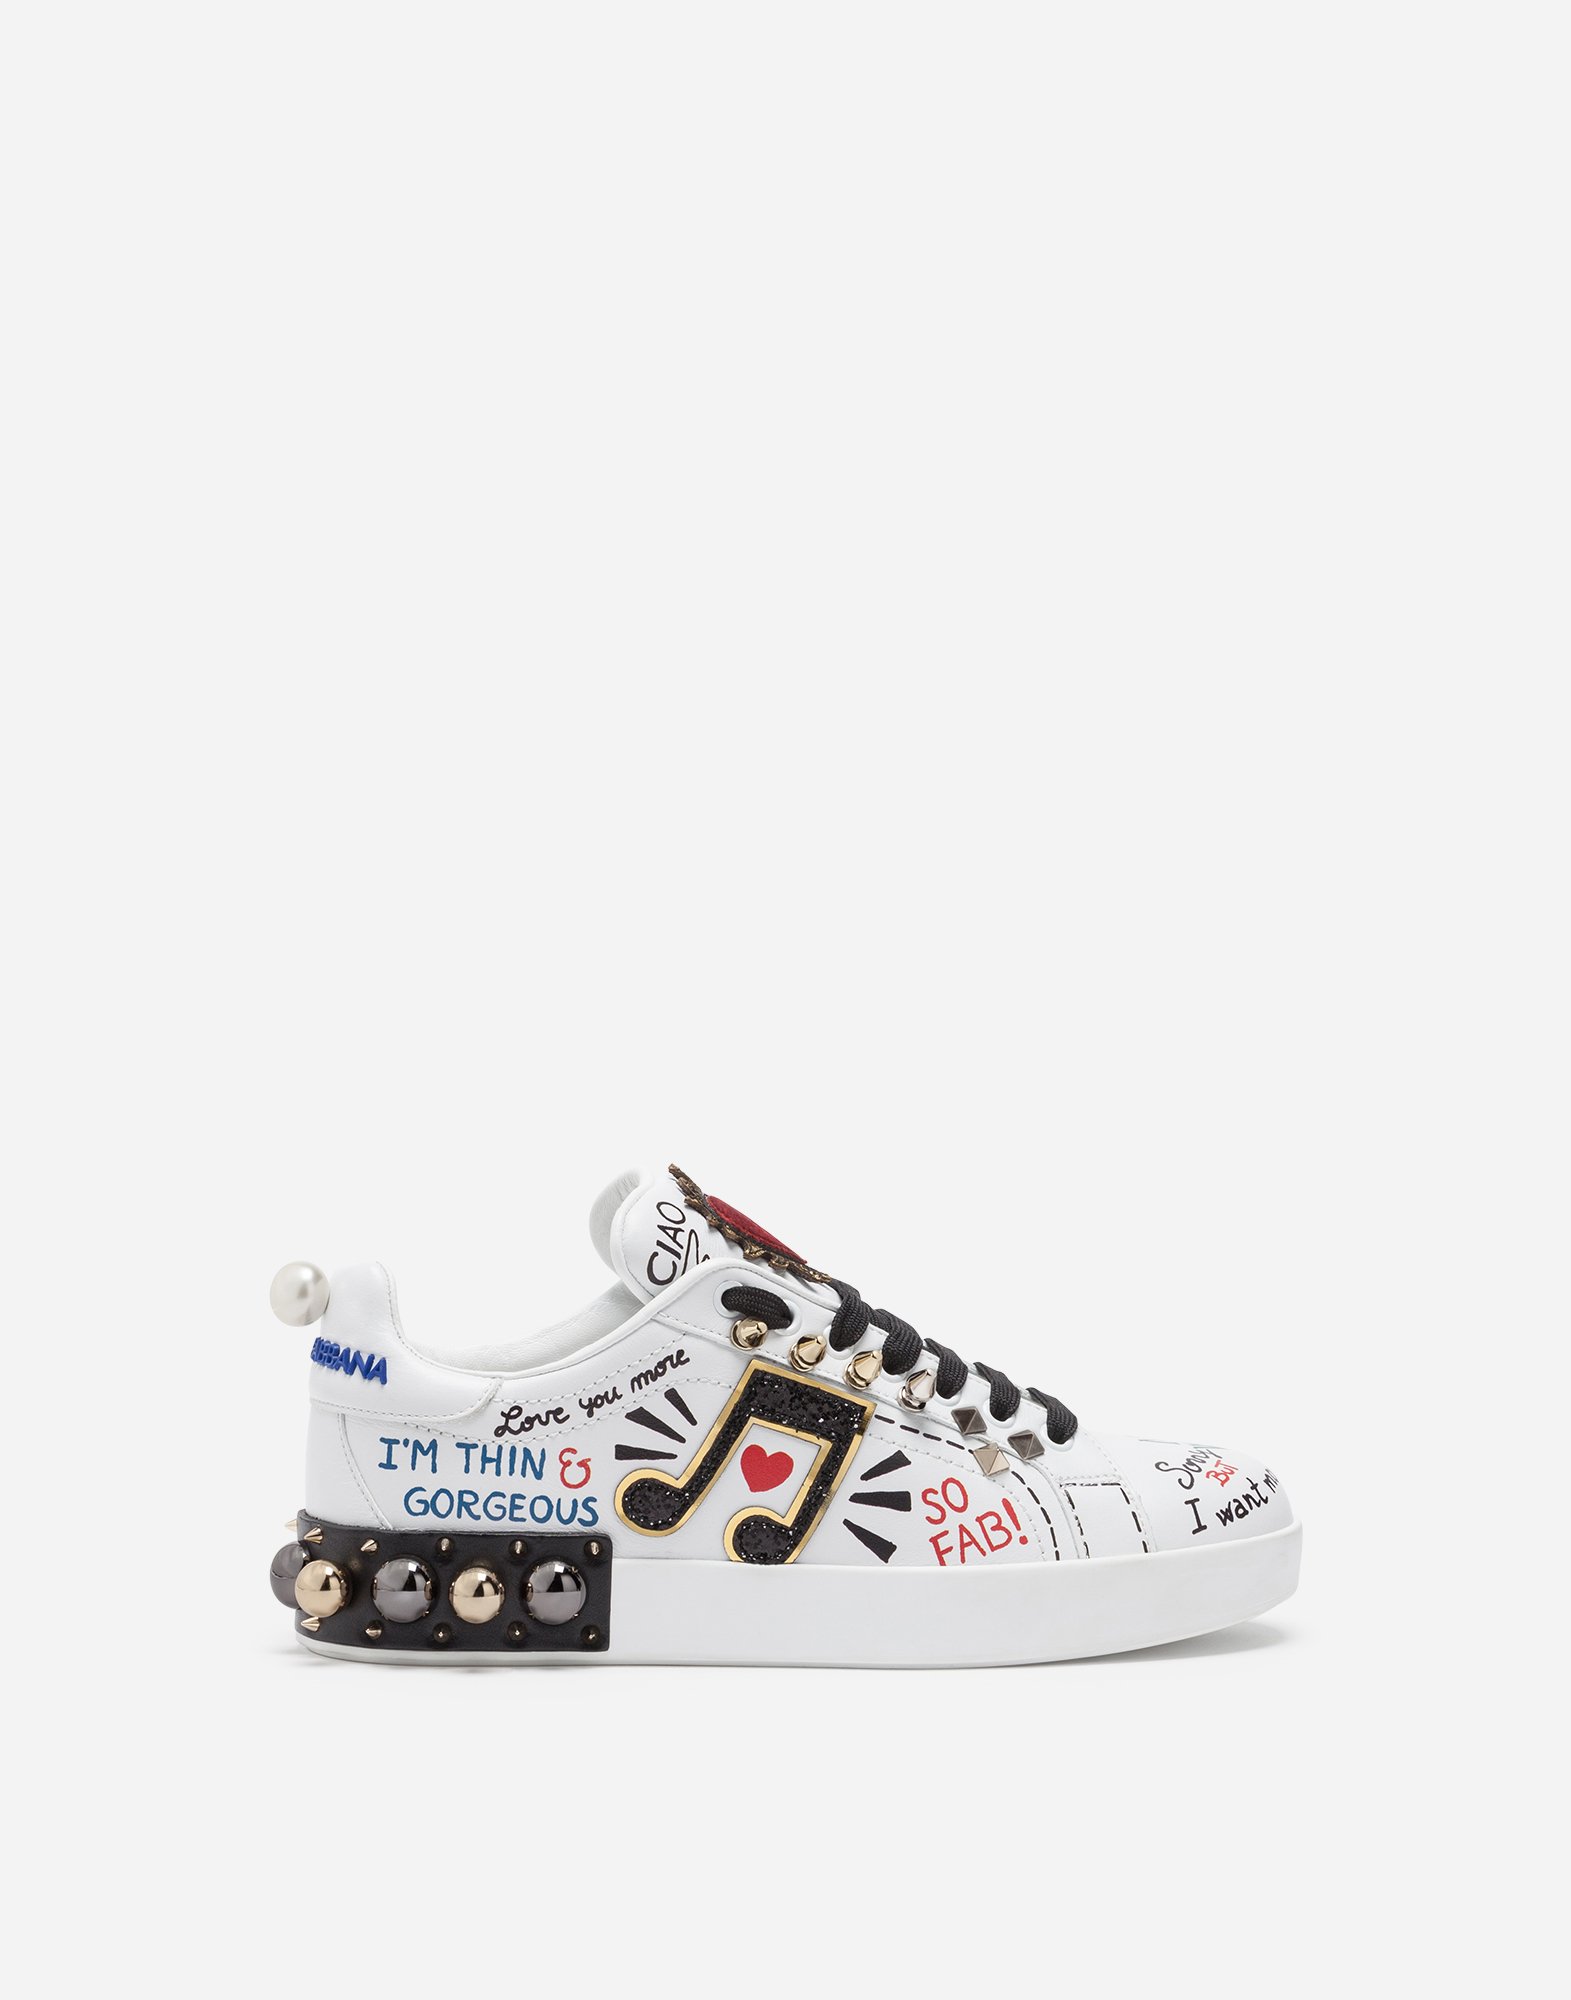 dolce and gabbana sneakers on sale